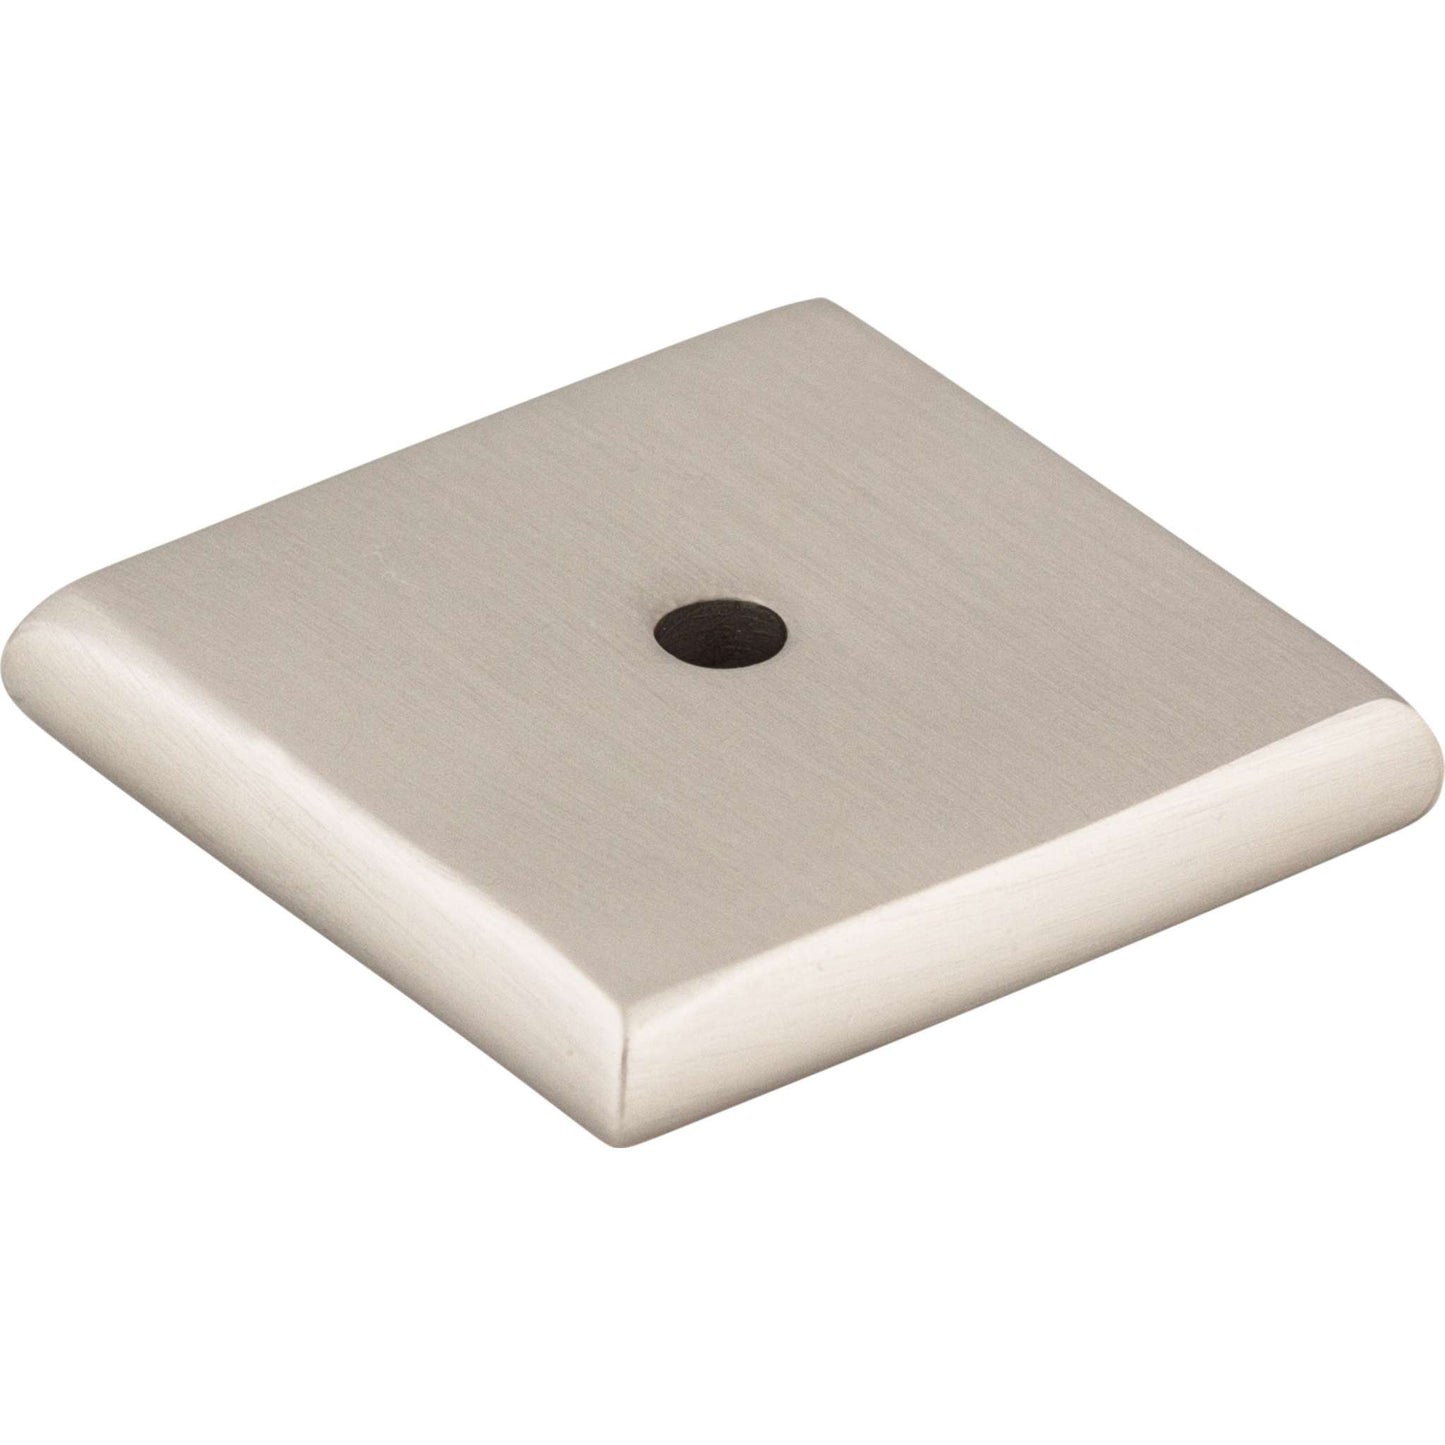 Top Knobs - Aspen II Square Backplate